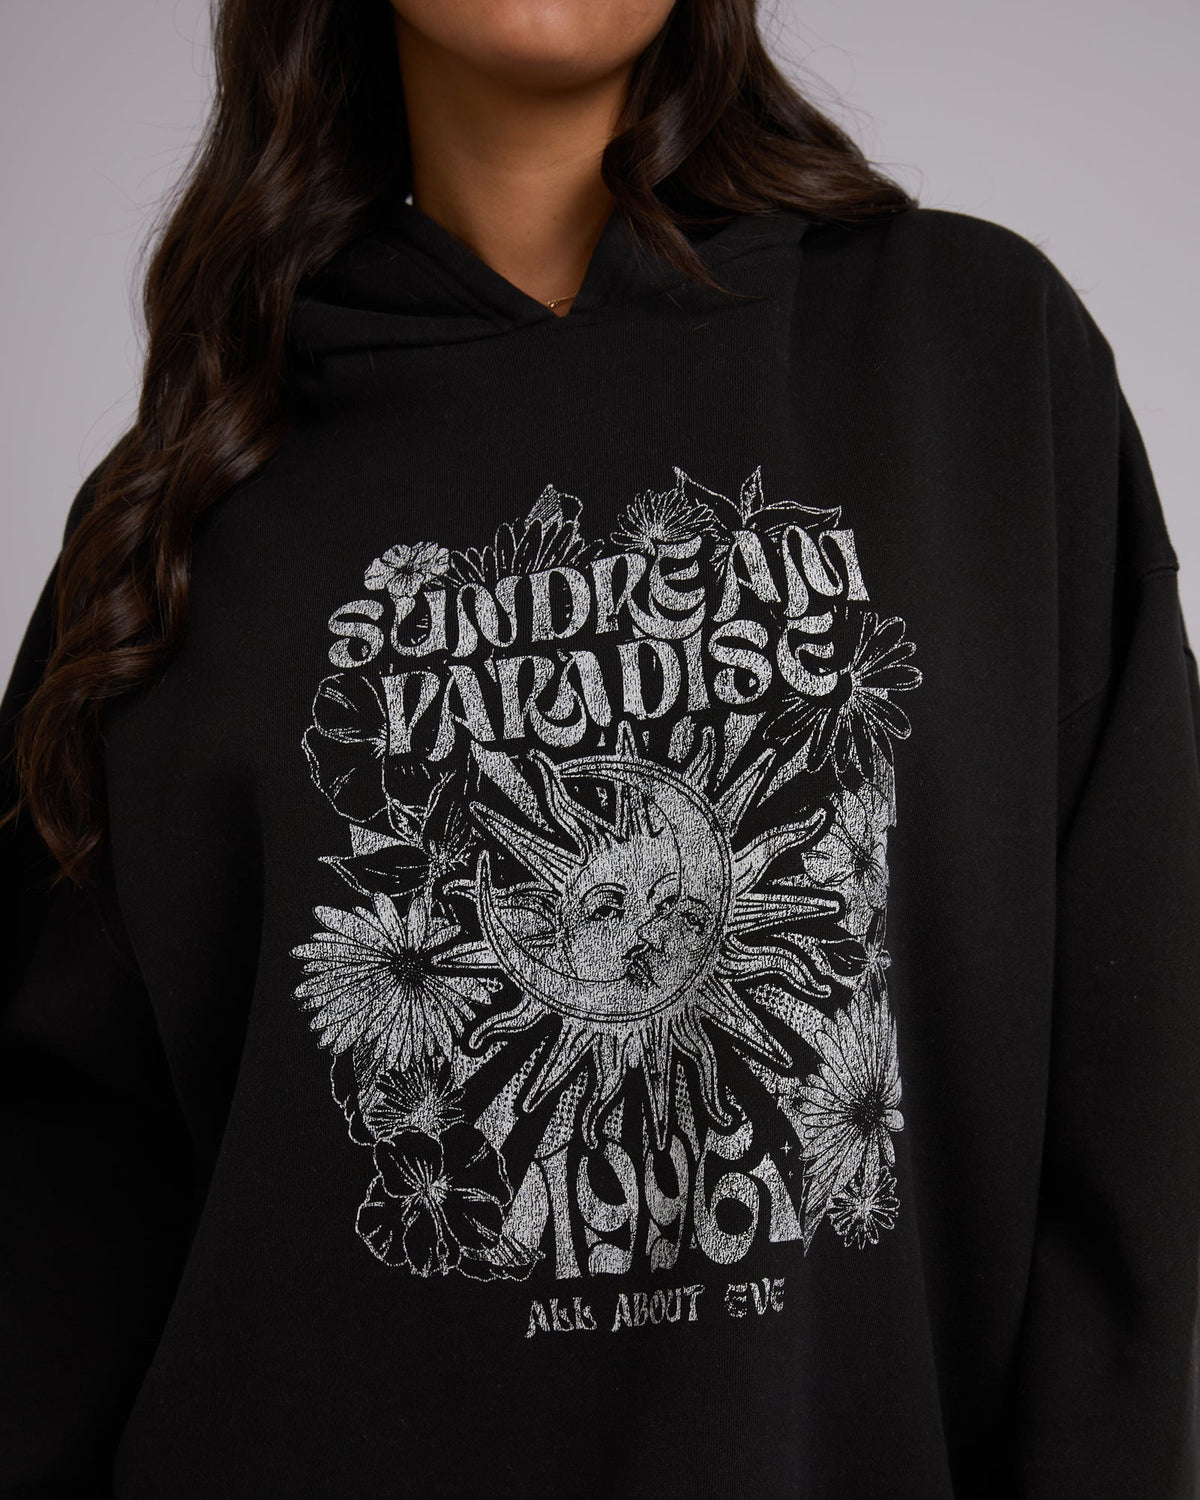 All About Eve-Sundream Hoodie Washed Black-Edge Clothing